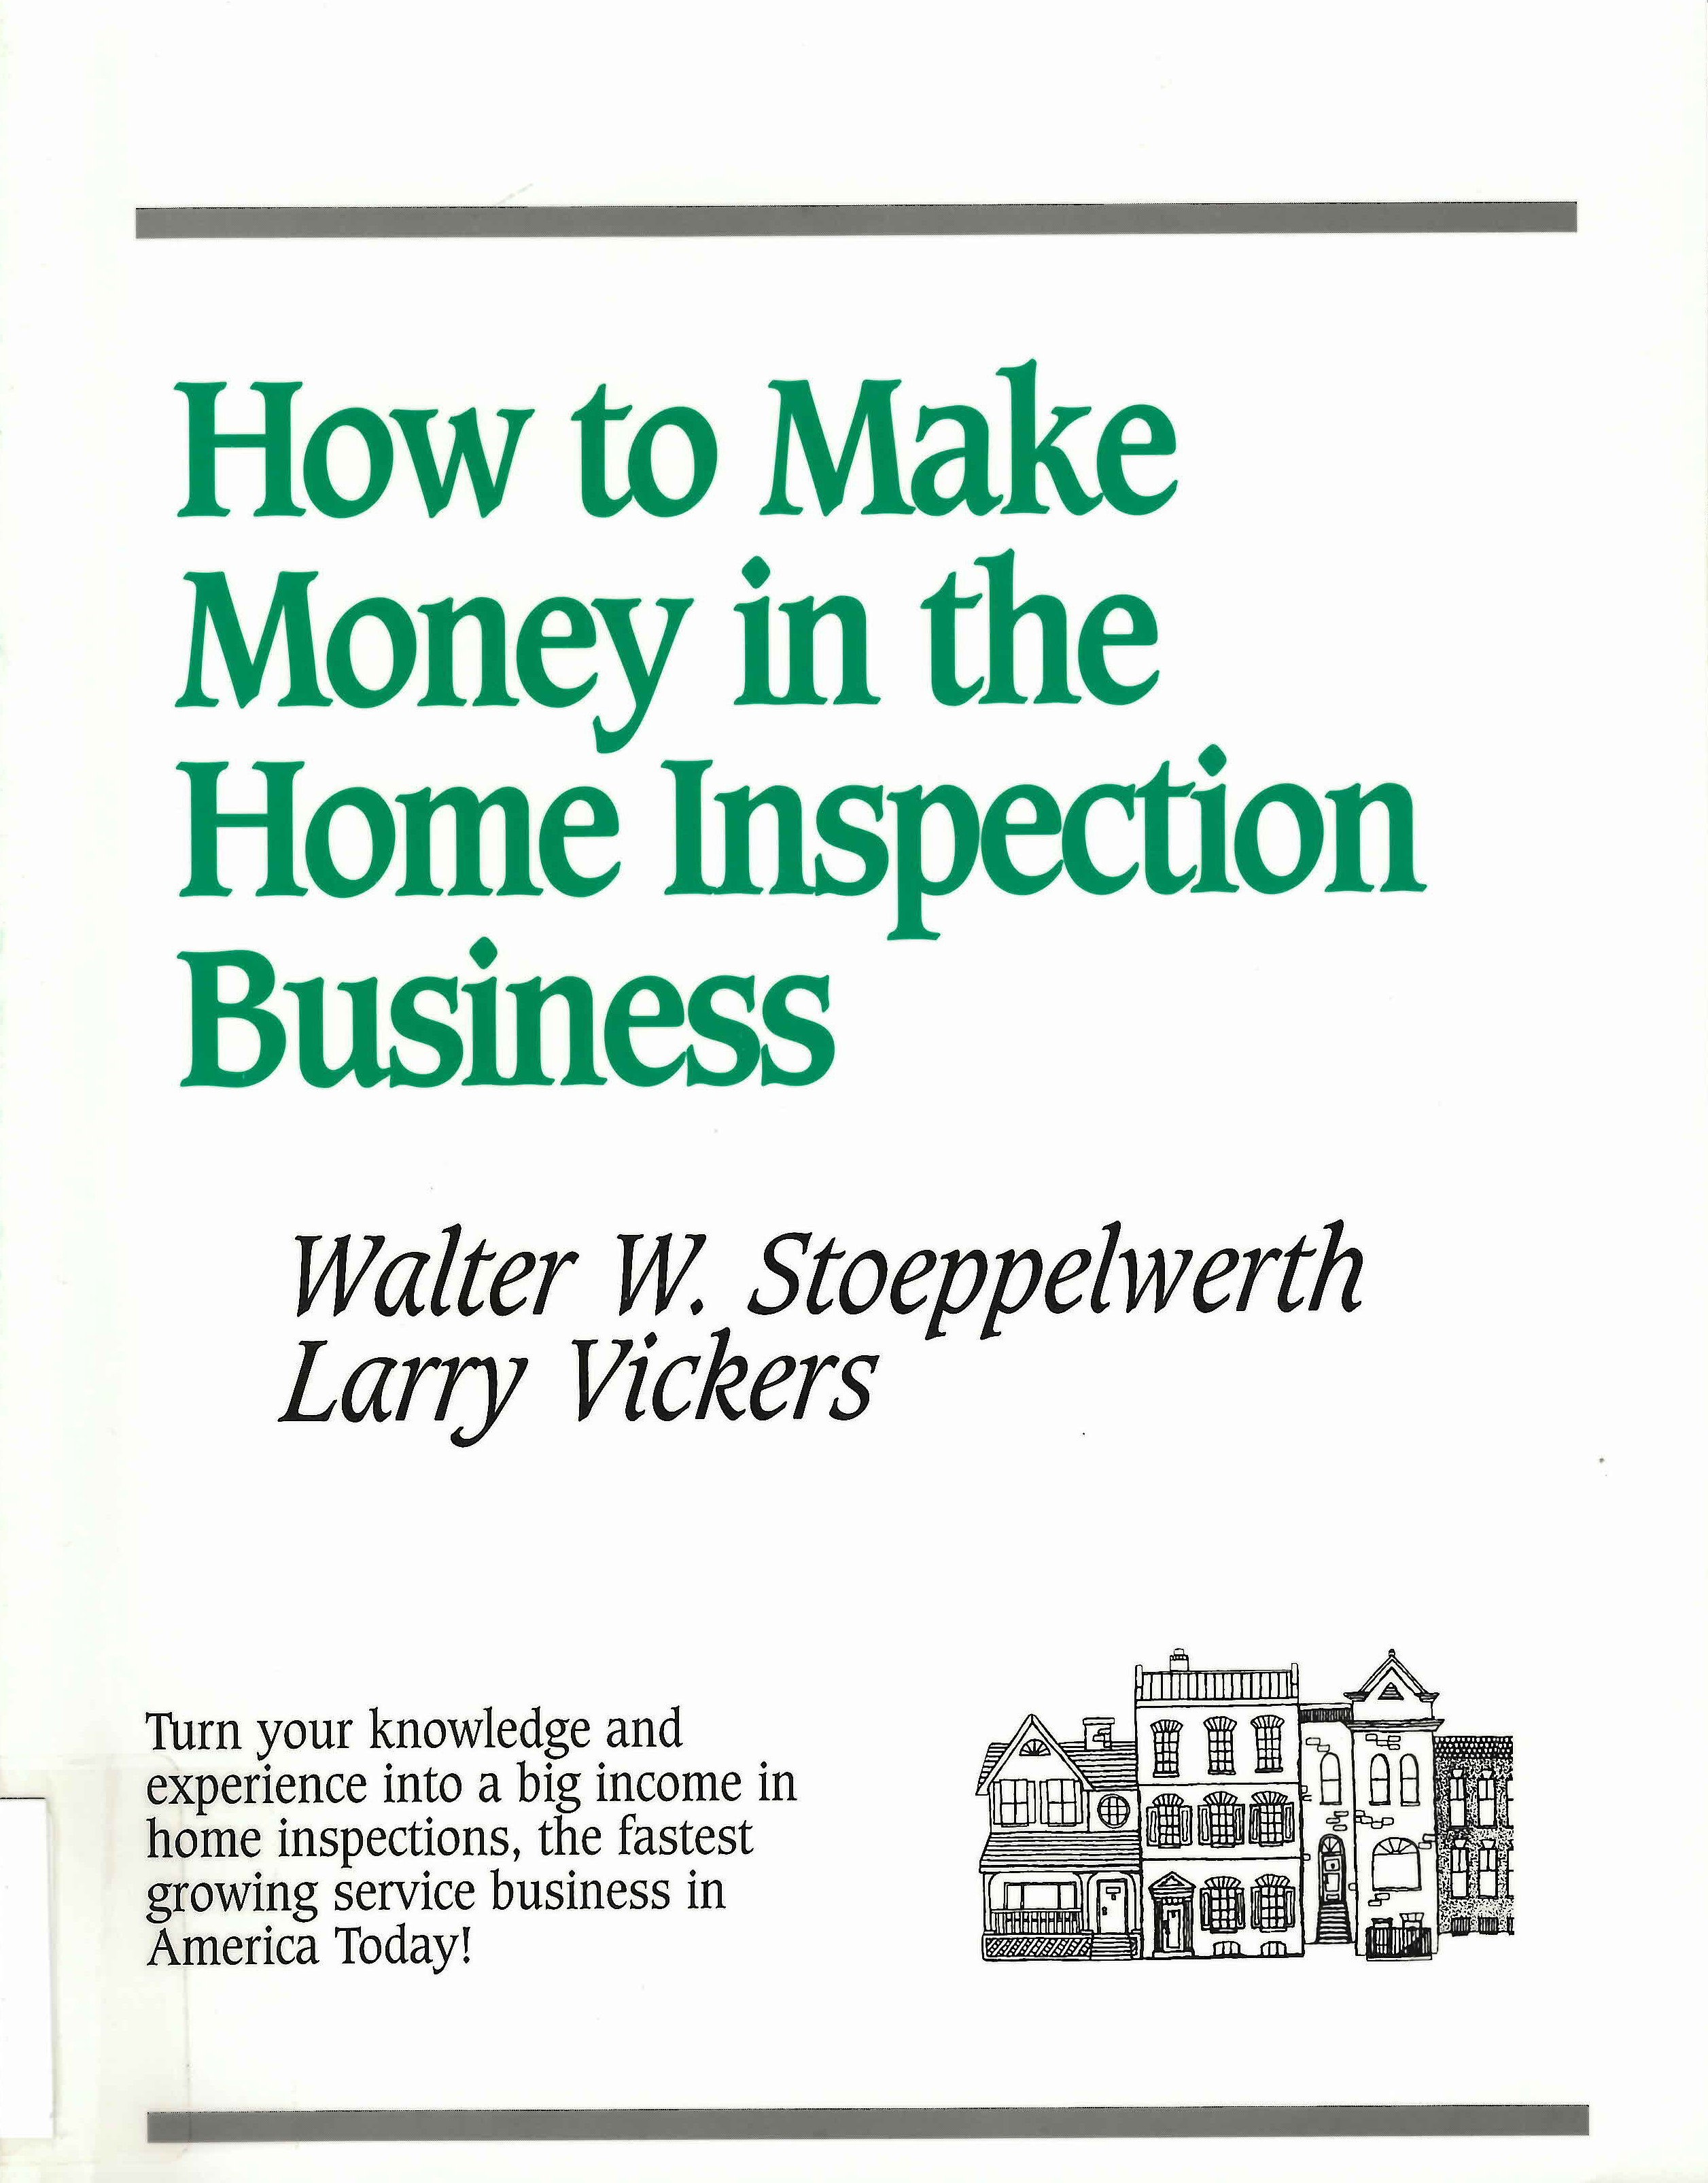 How to make money in the home inspection business